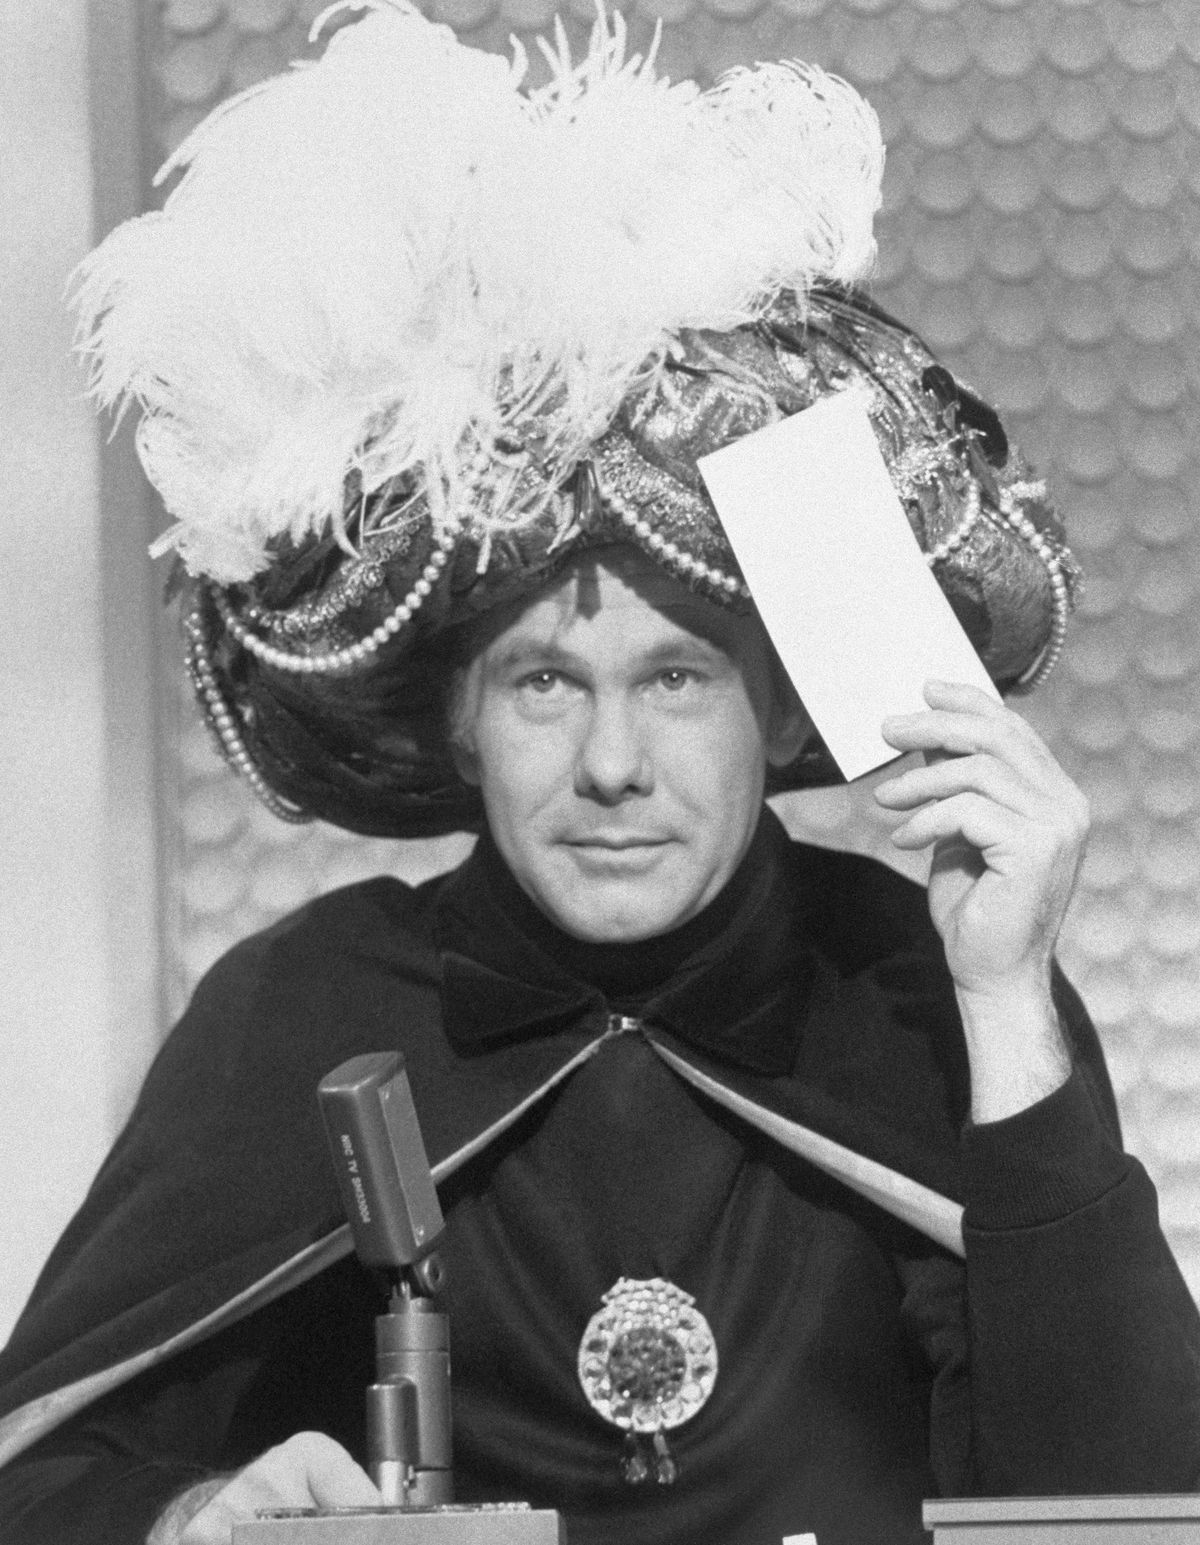 Television Host Johnny Carson as “Carnac the Magnificent”